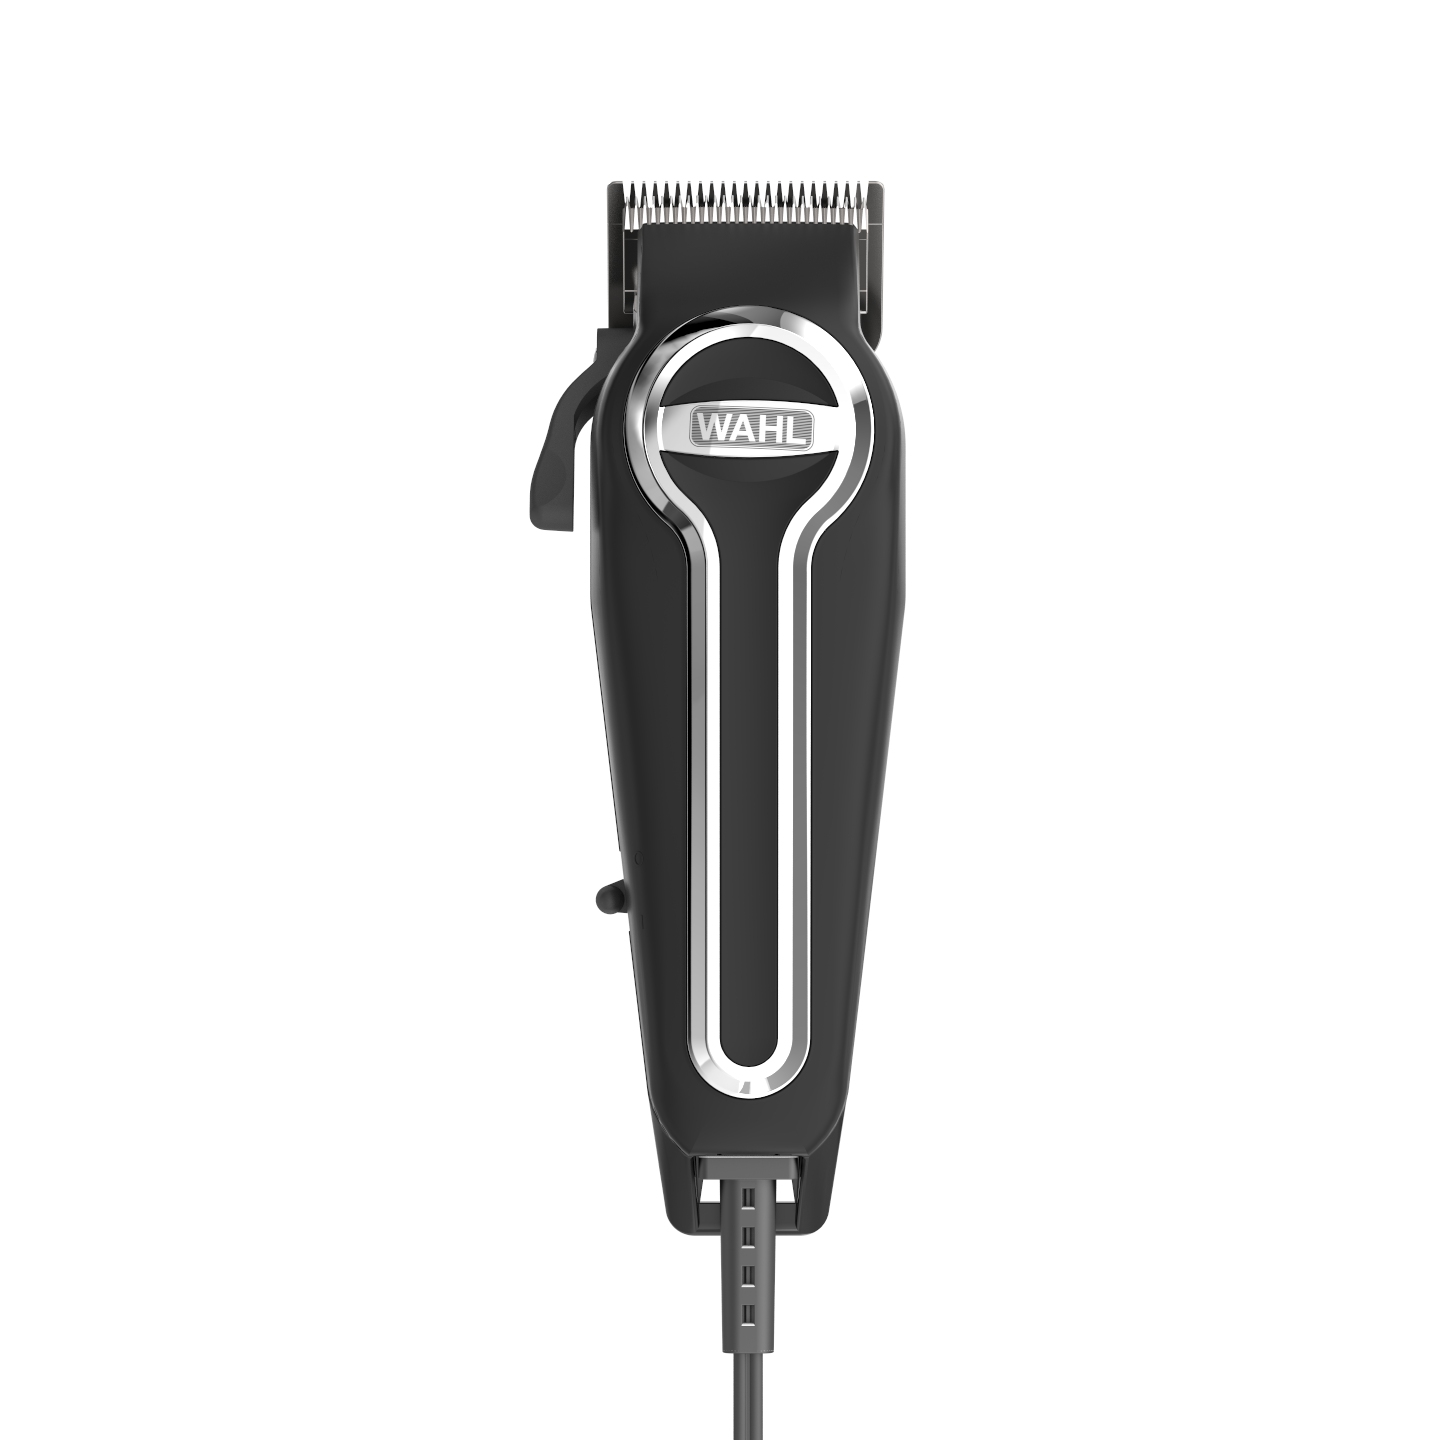 Wahl Elite Pro Haircutting Kit | Best Clipper Kit for Home Haircuts